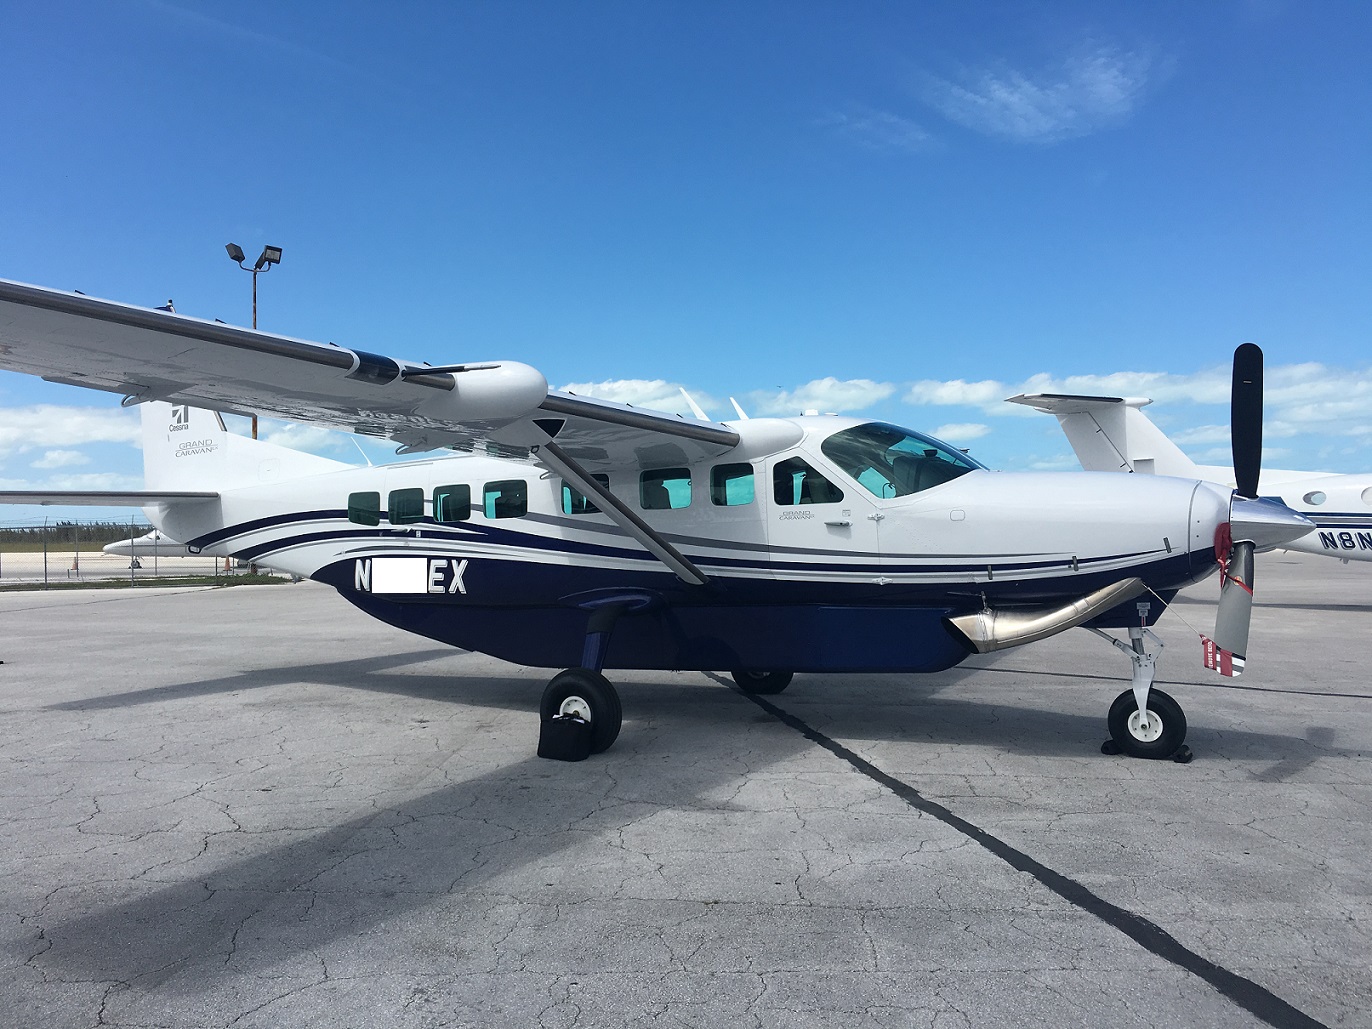 Africair, Inc. Delivers a New Cessna Grand Caravan EX to Tanzania